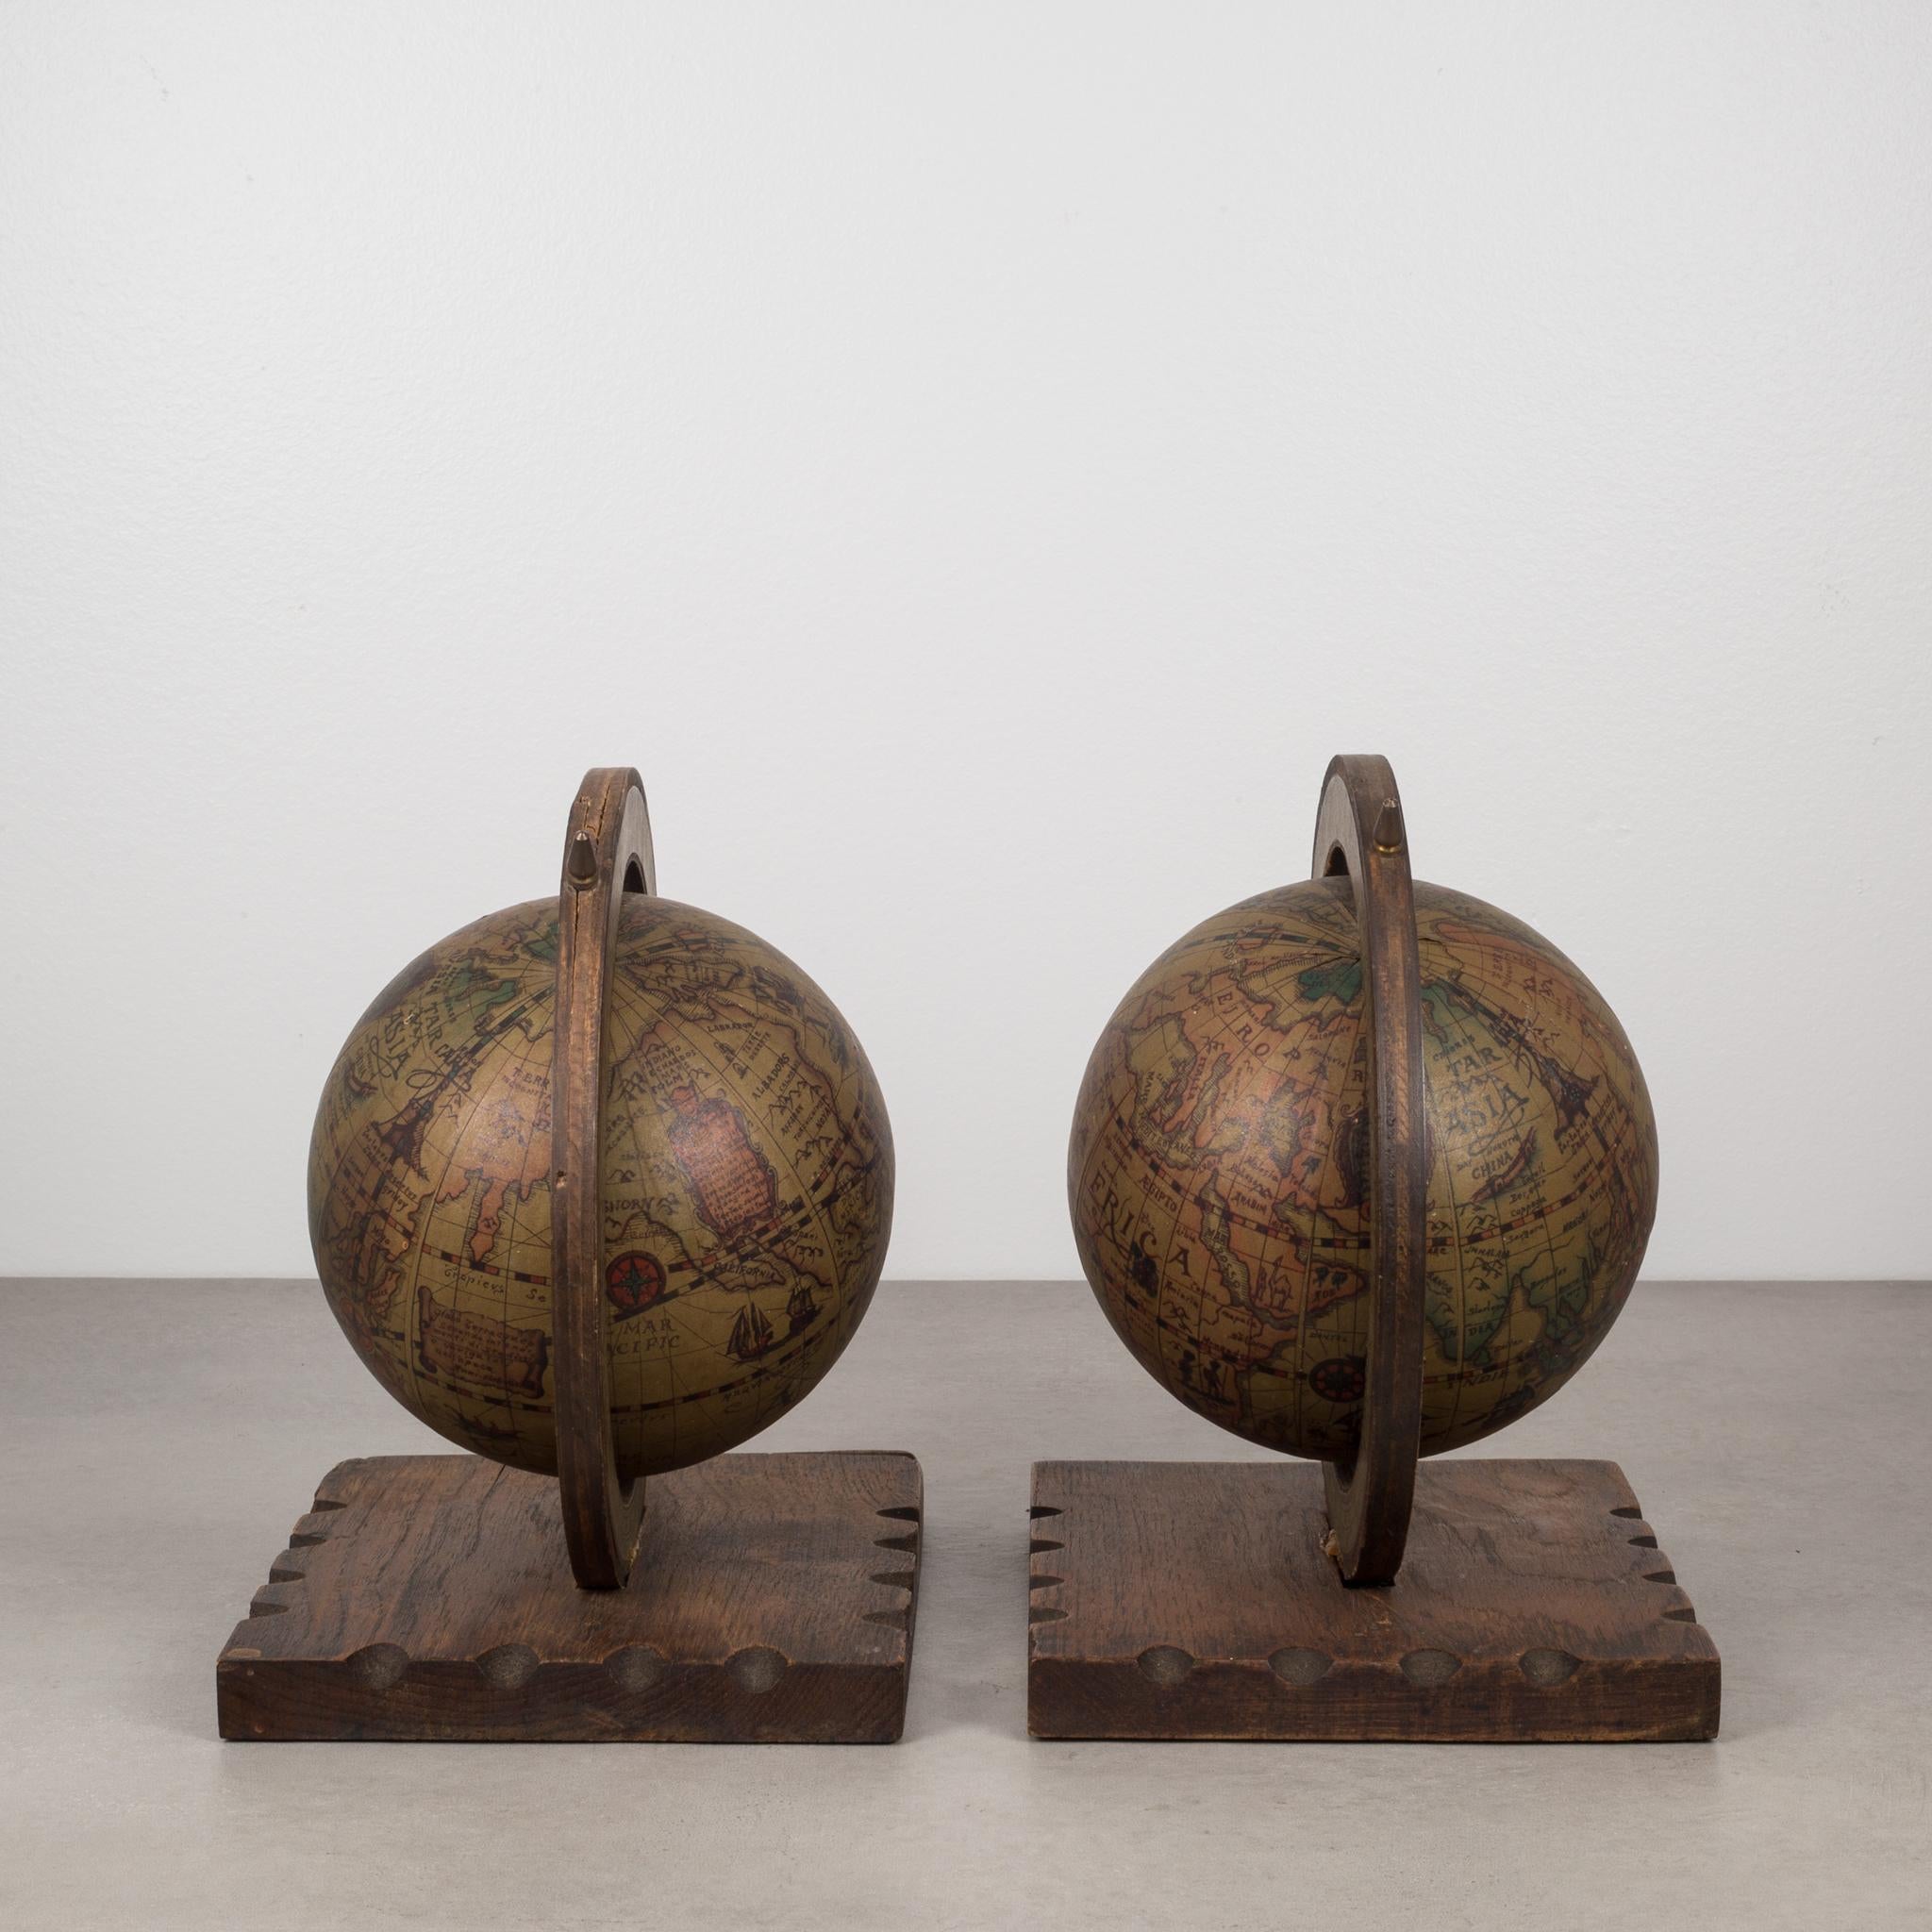 American Early to Mid-20th Century Rotating Globe Bookends, circa 1940s-1950s